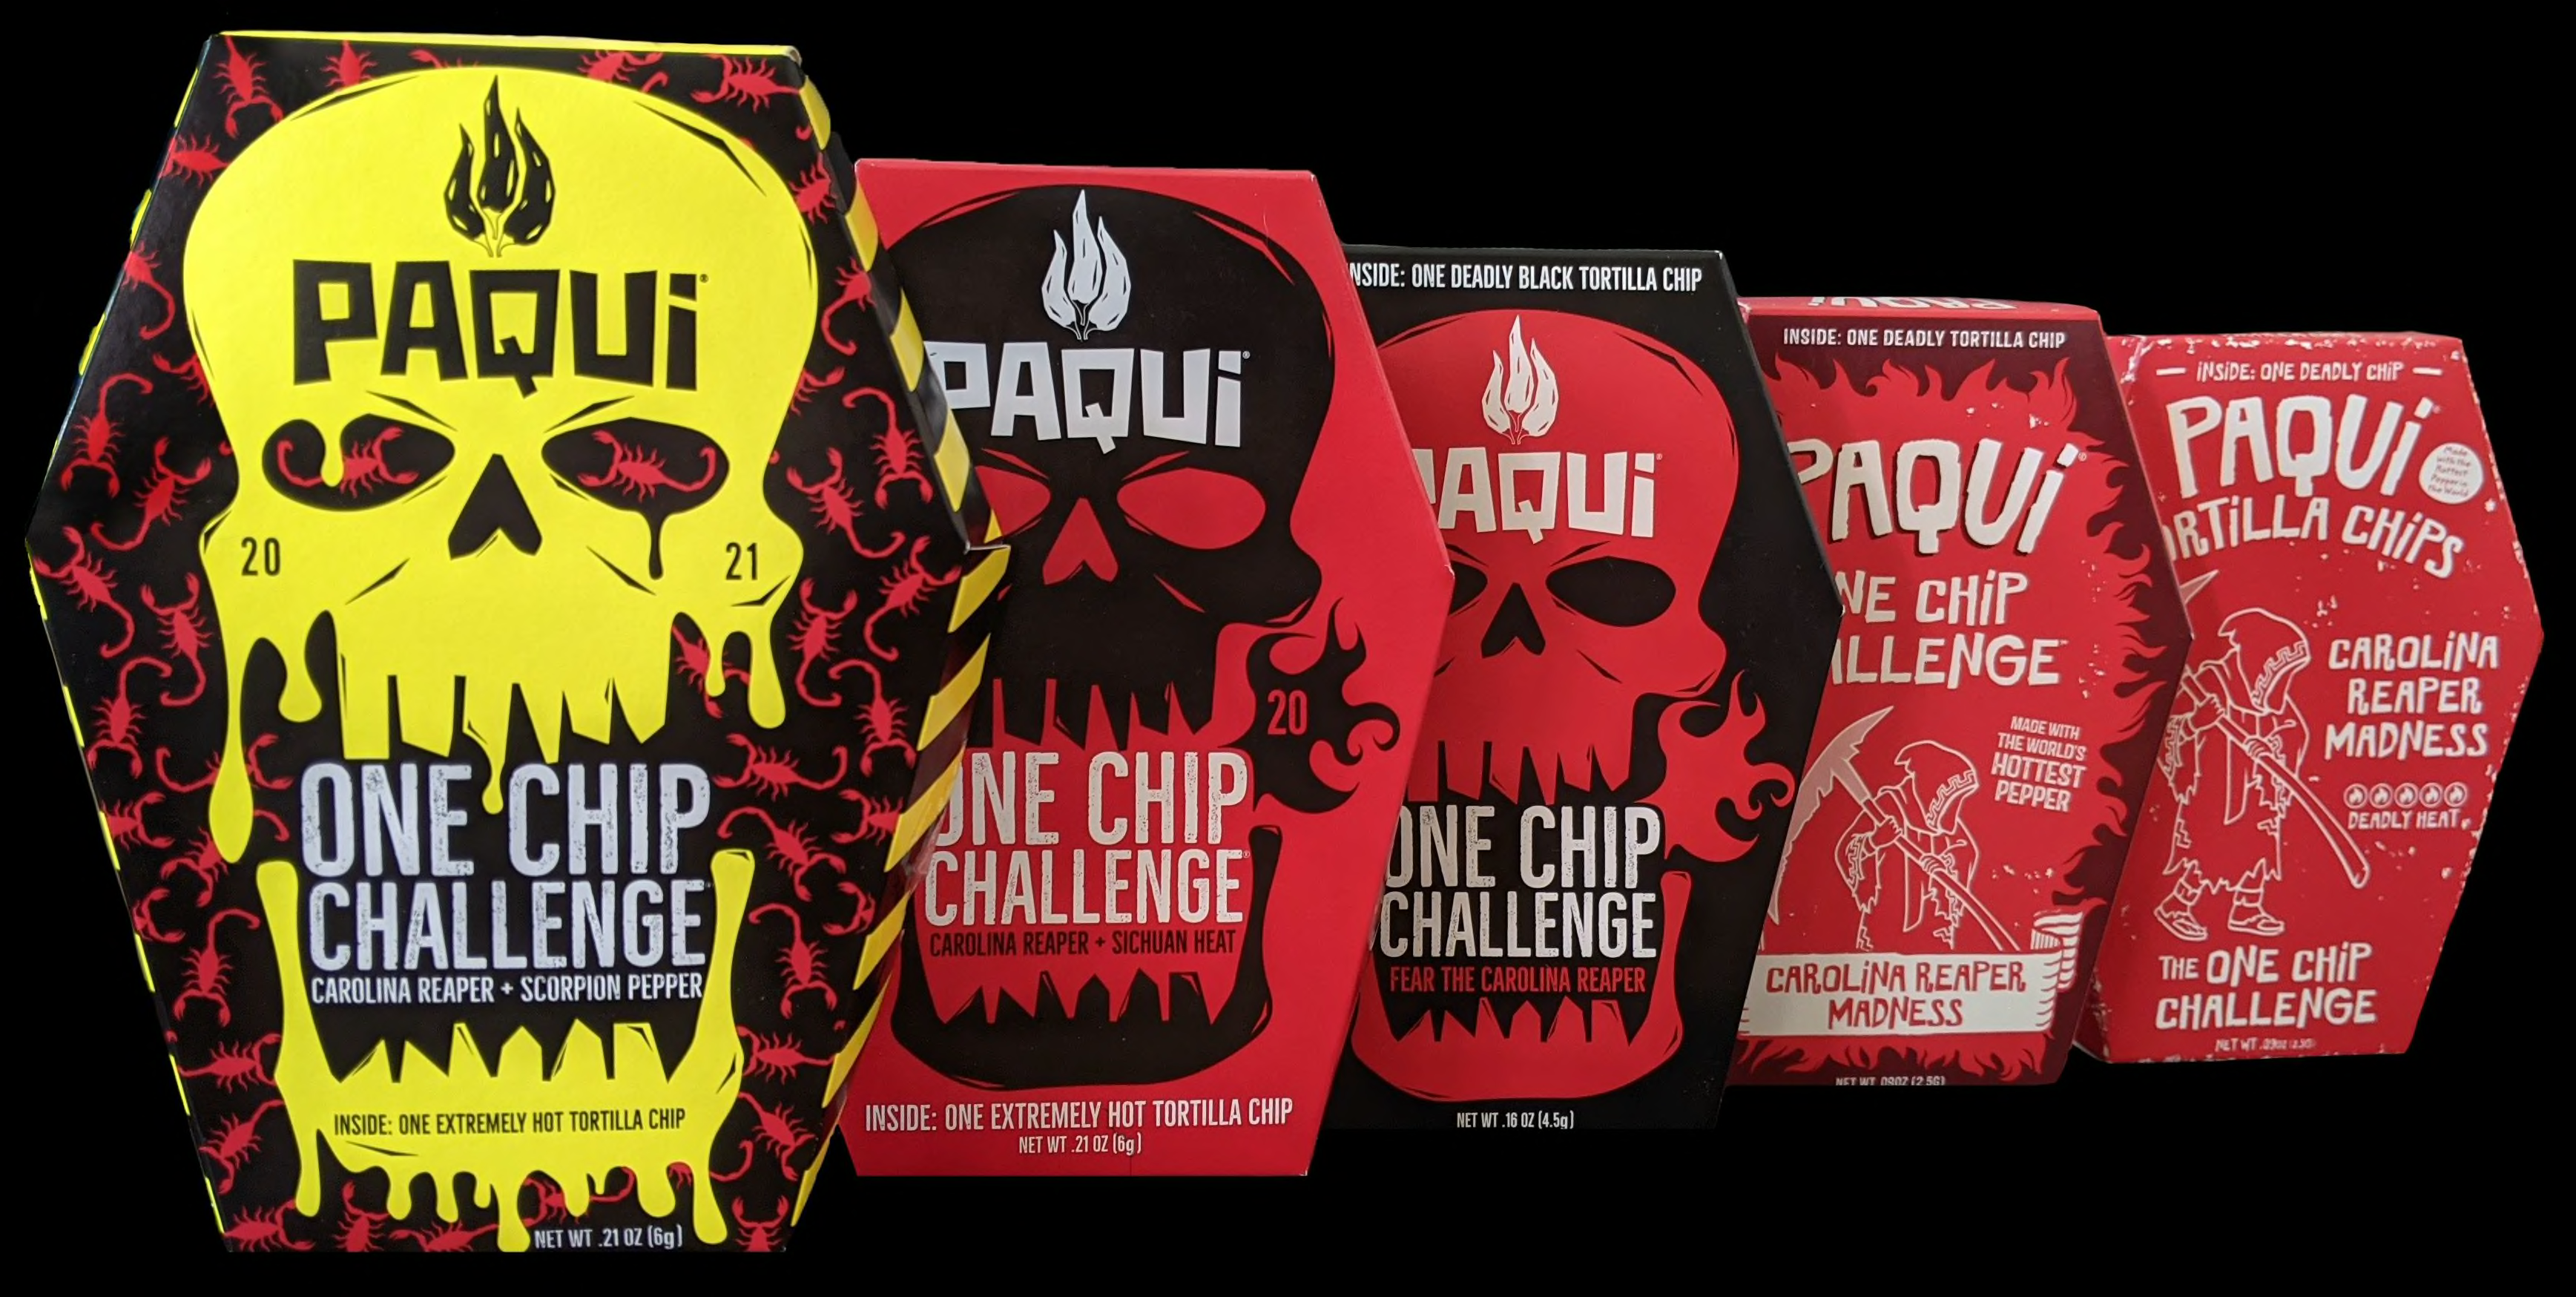 The Paqui One Chip Challenge is back!